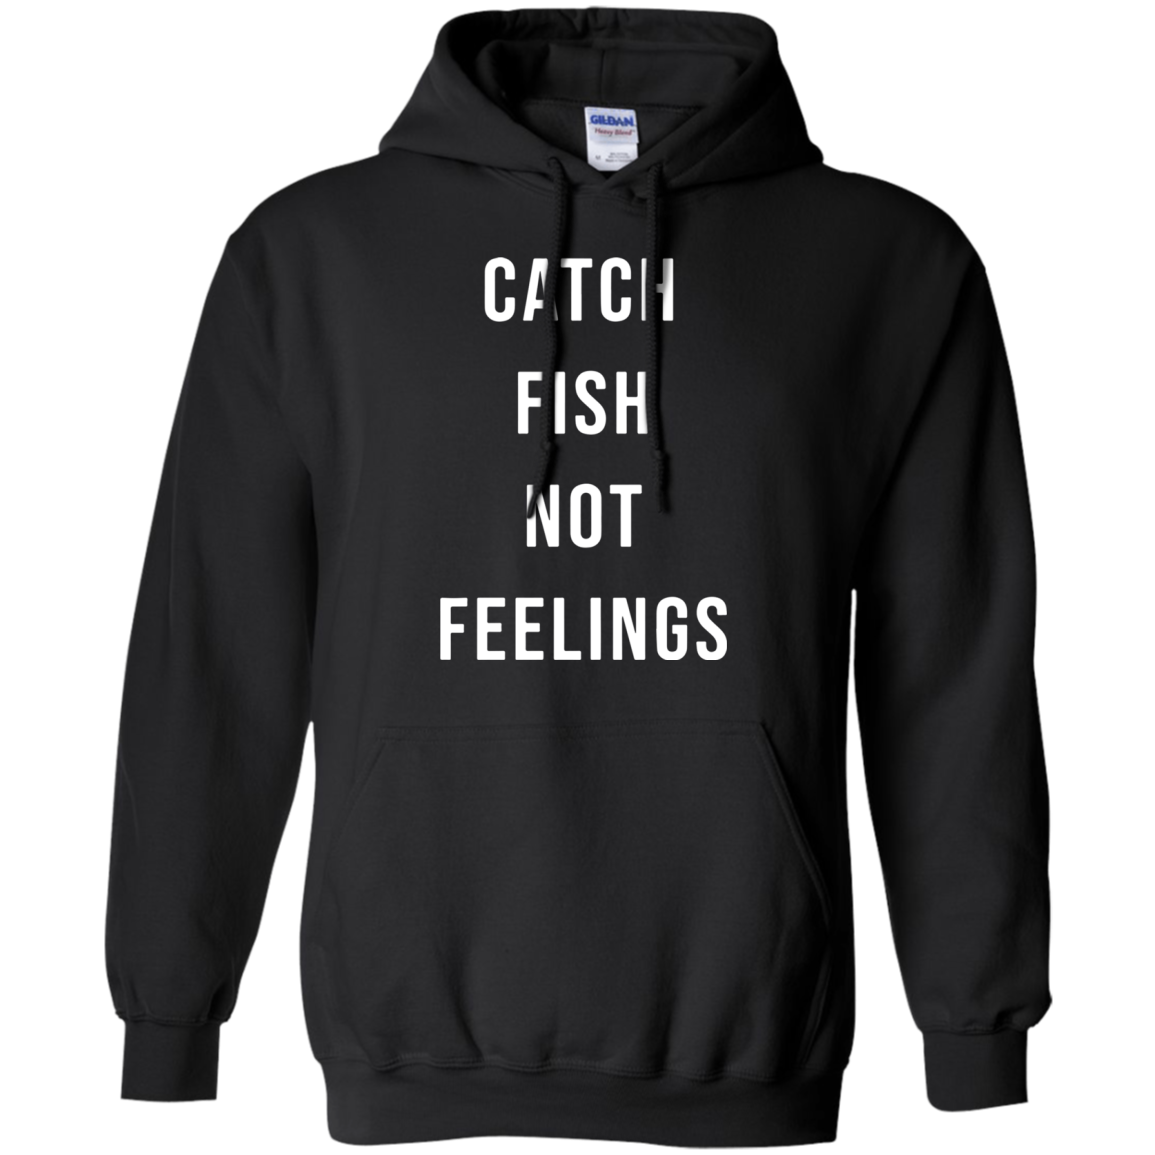 Catch Fish Not Feelings G185 Pullover 8 Oz. Shirts